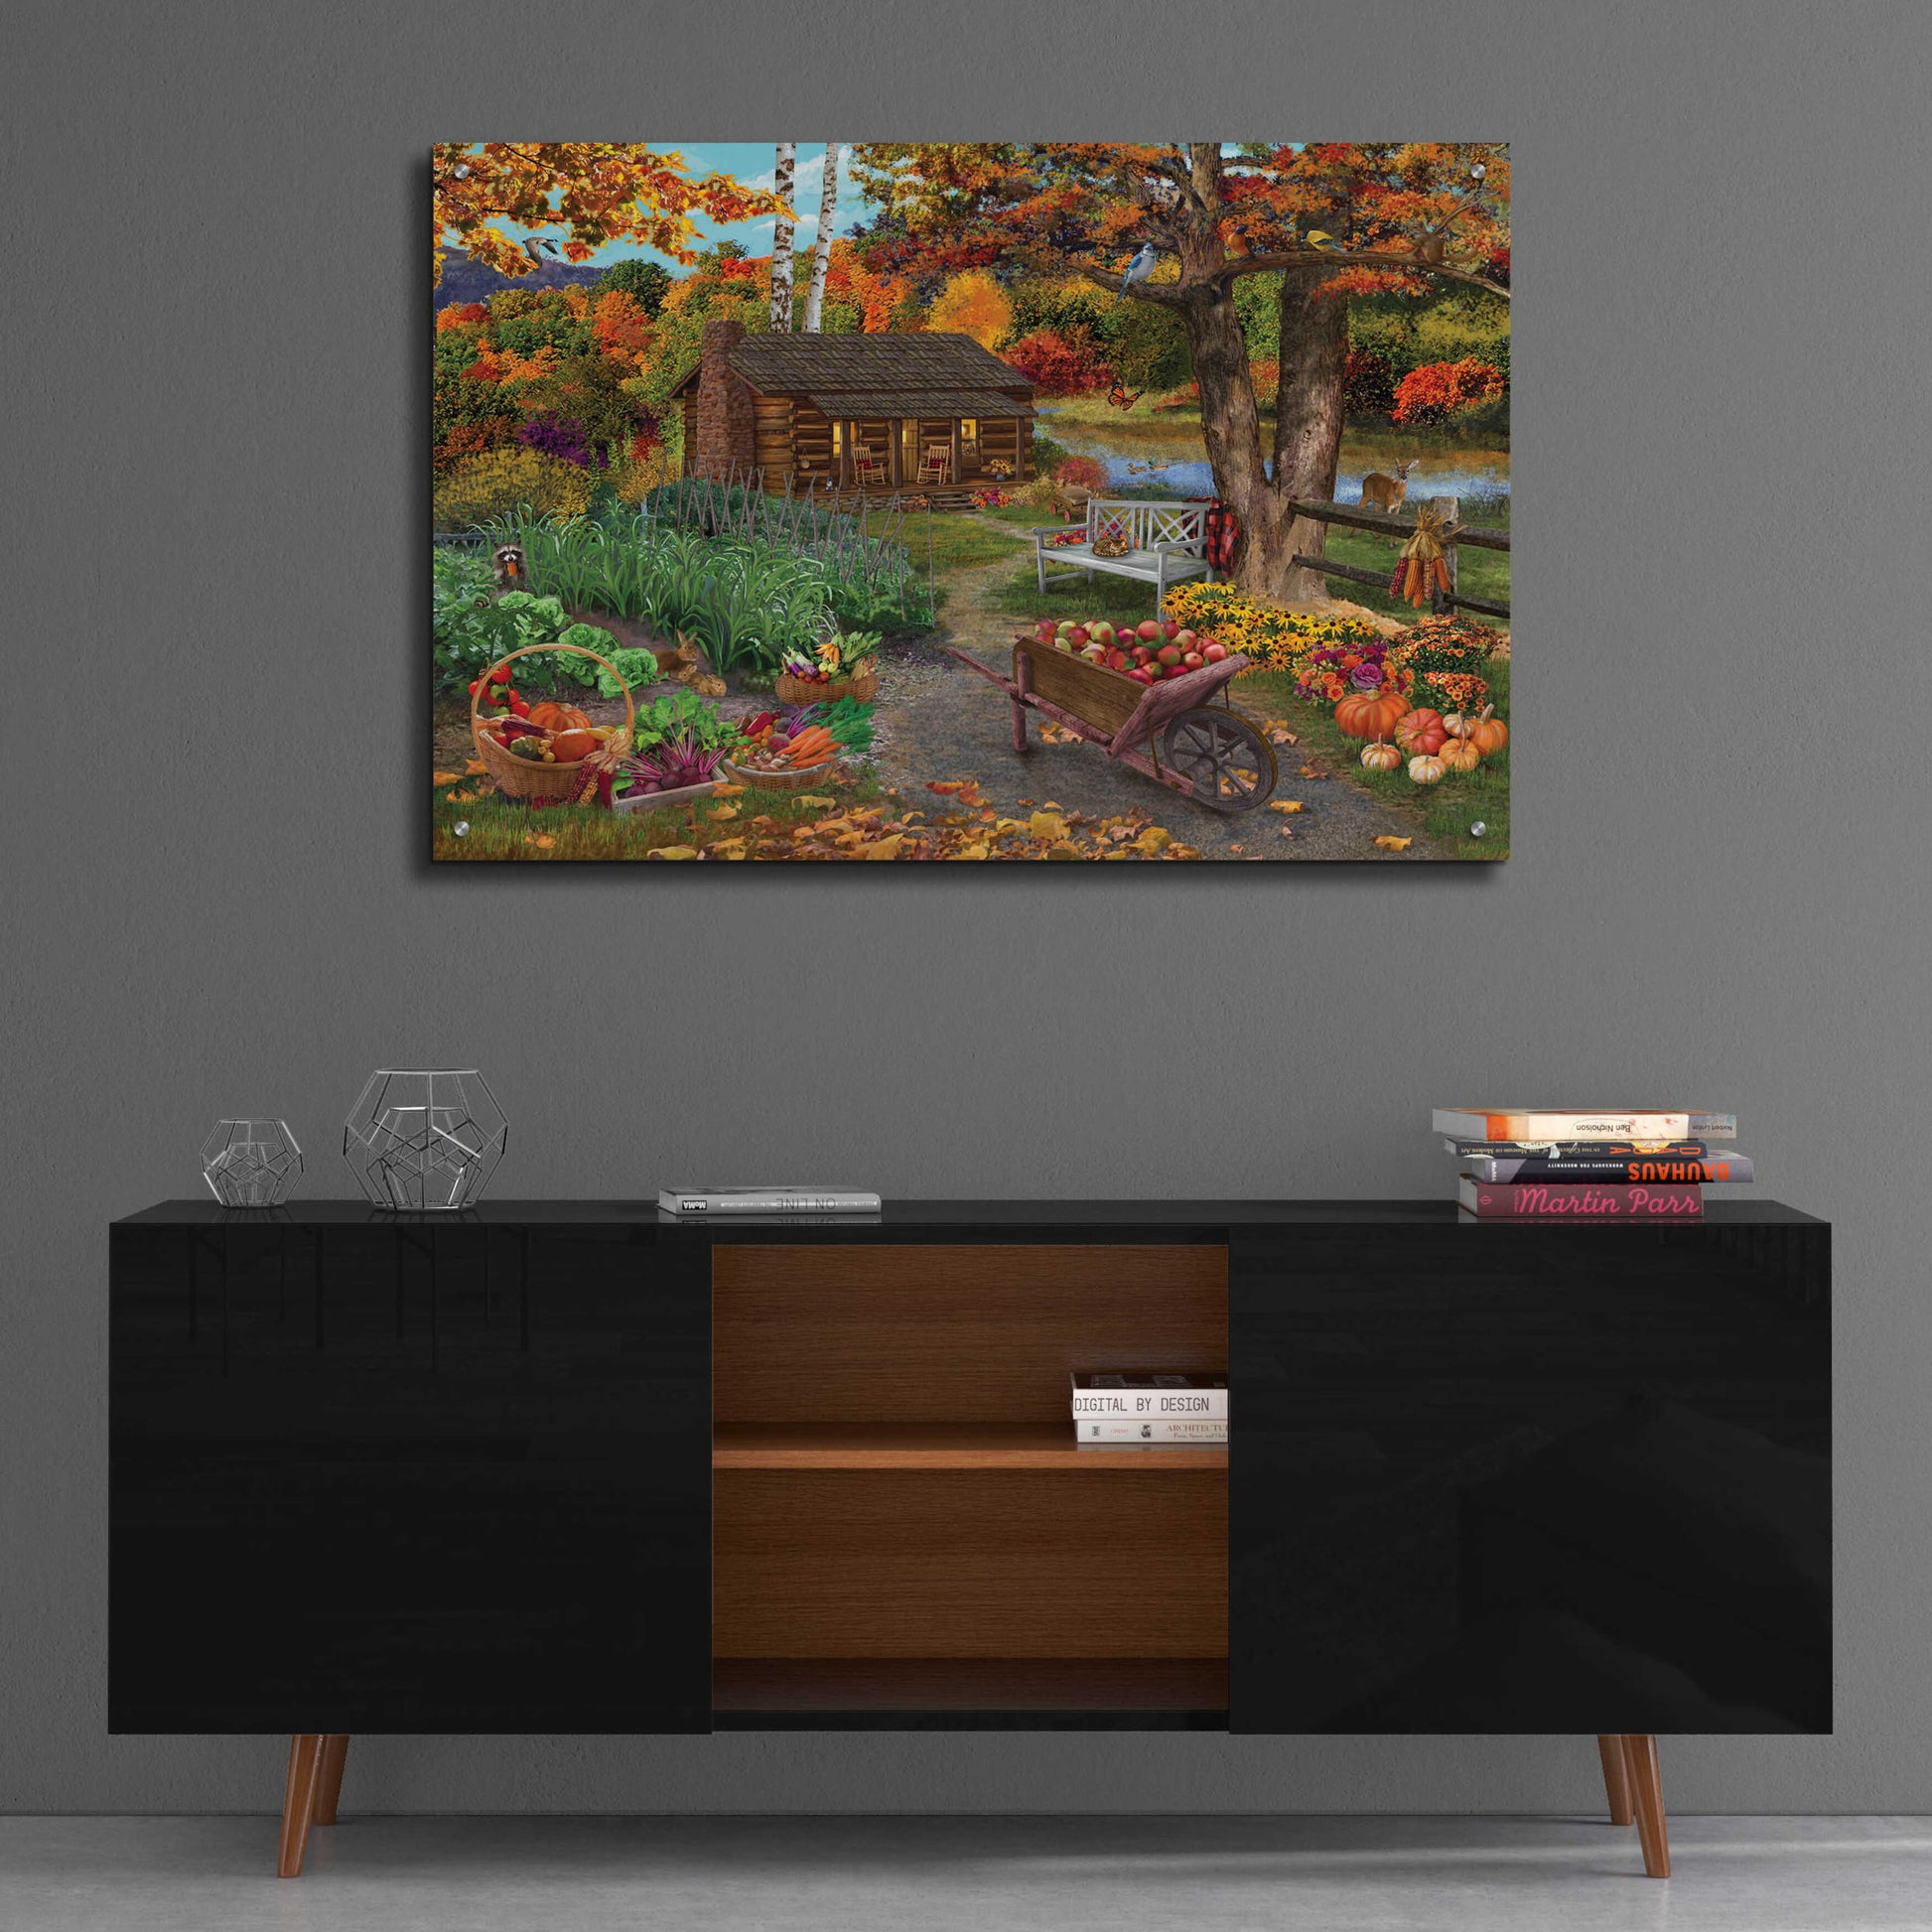 Epic Art 'Harvest at the Cabin' by Bigelow Illustrations, Acrylic Glass Wall Art,36x24